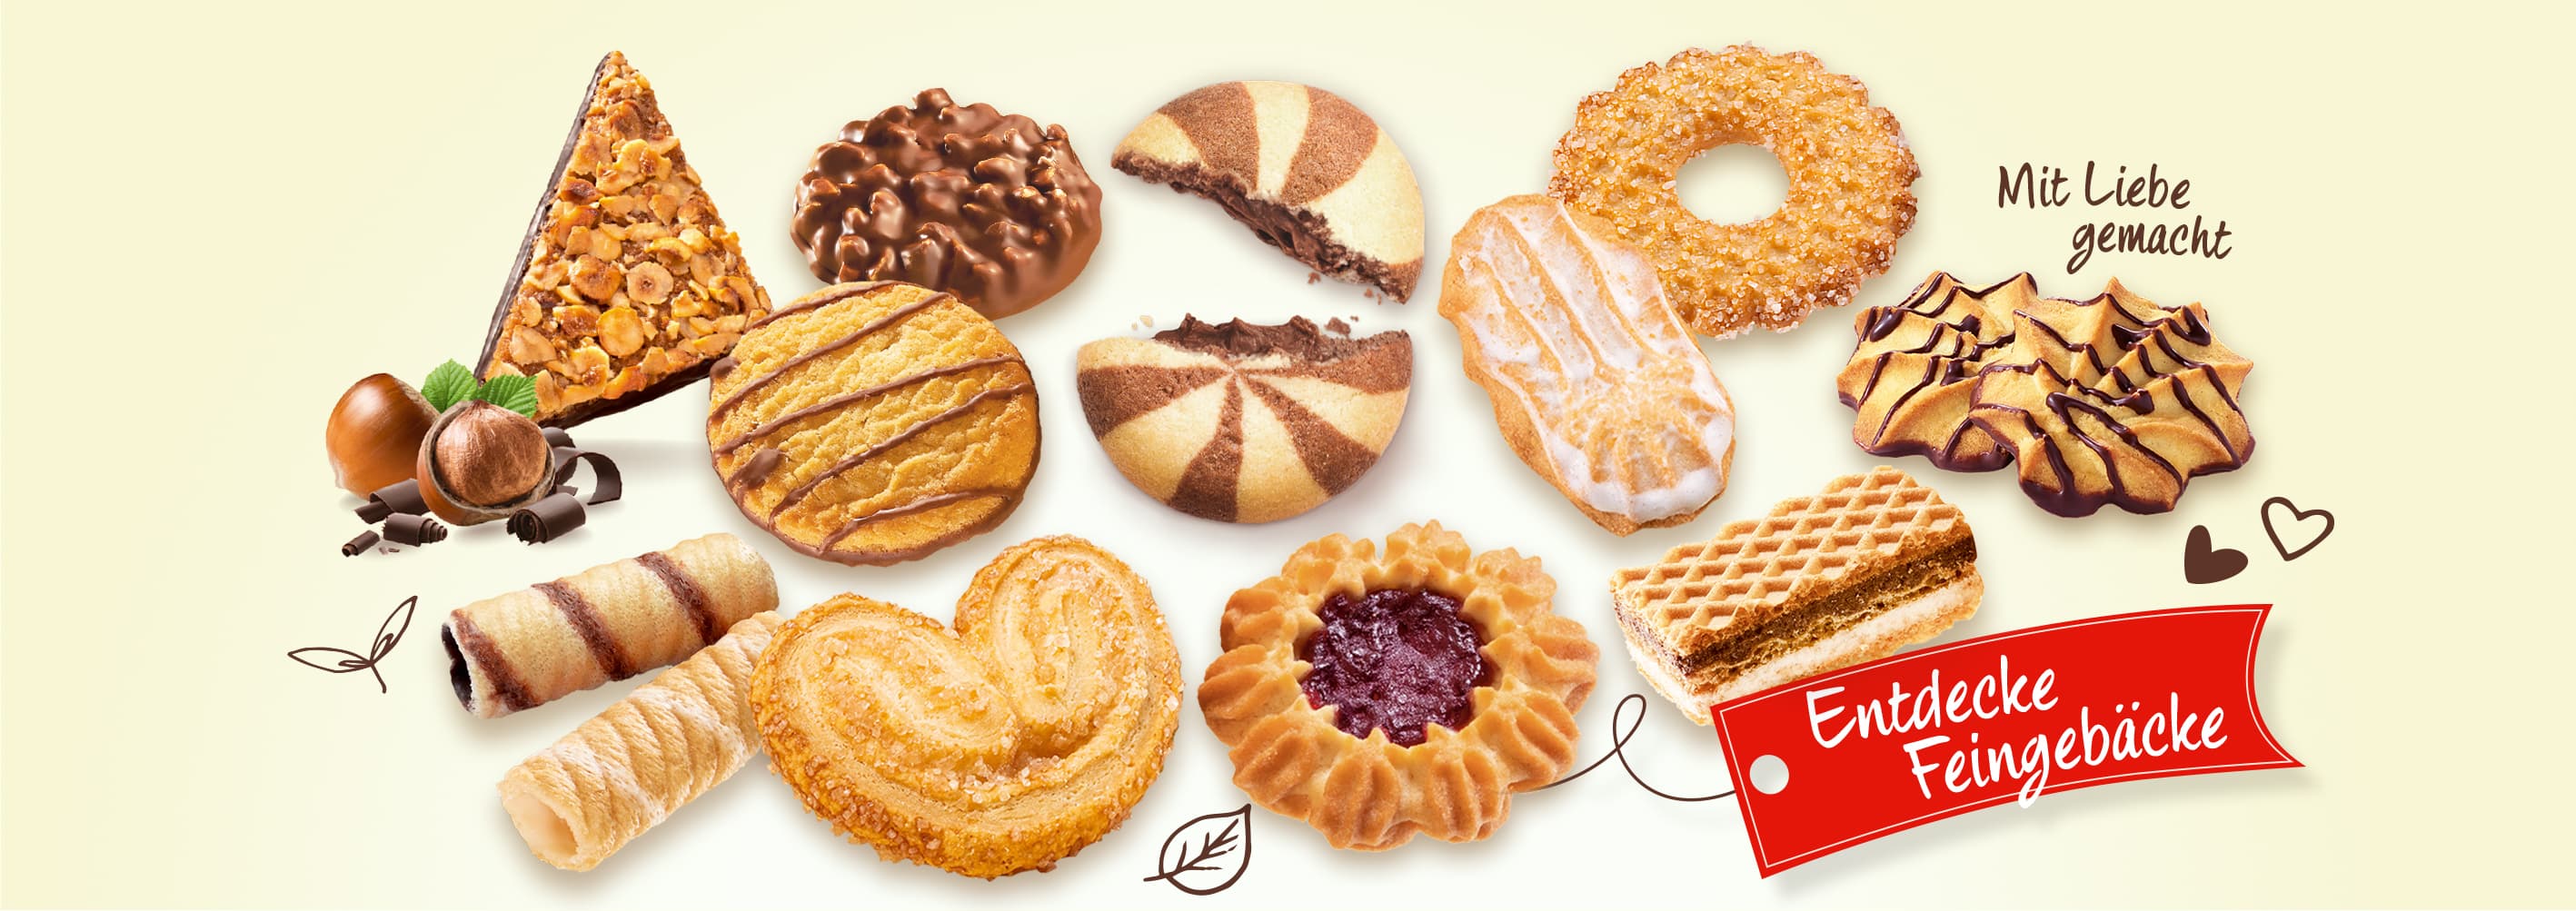 The range of pastries at a glance